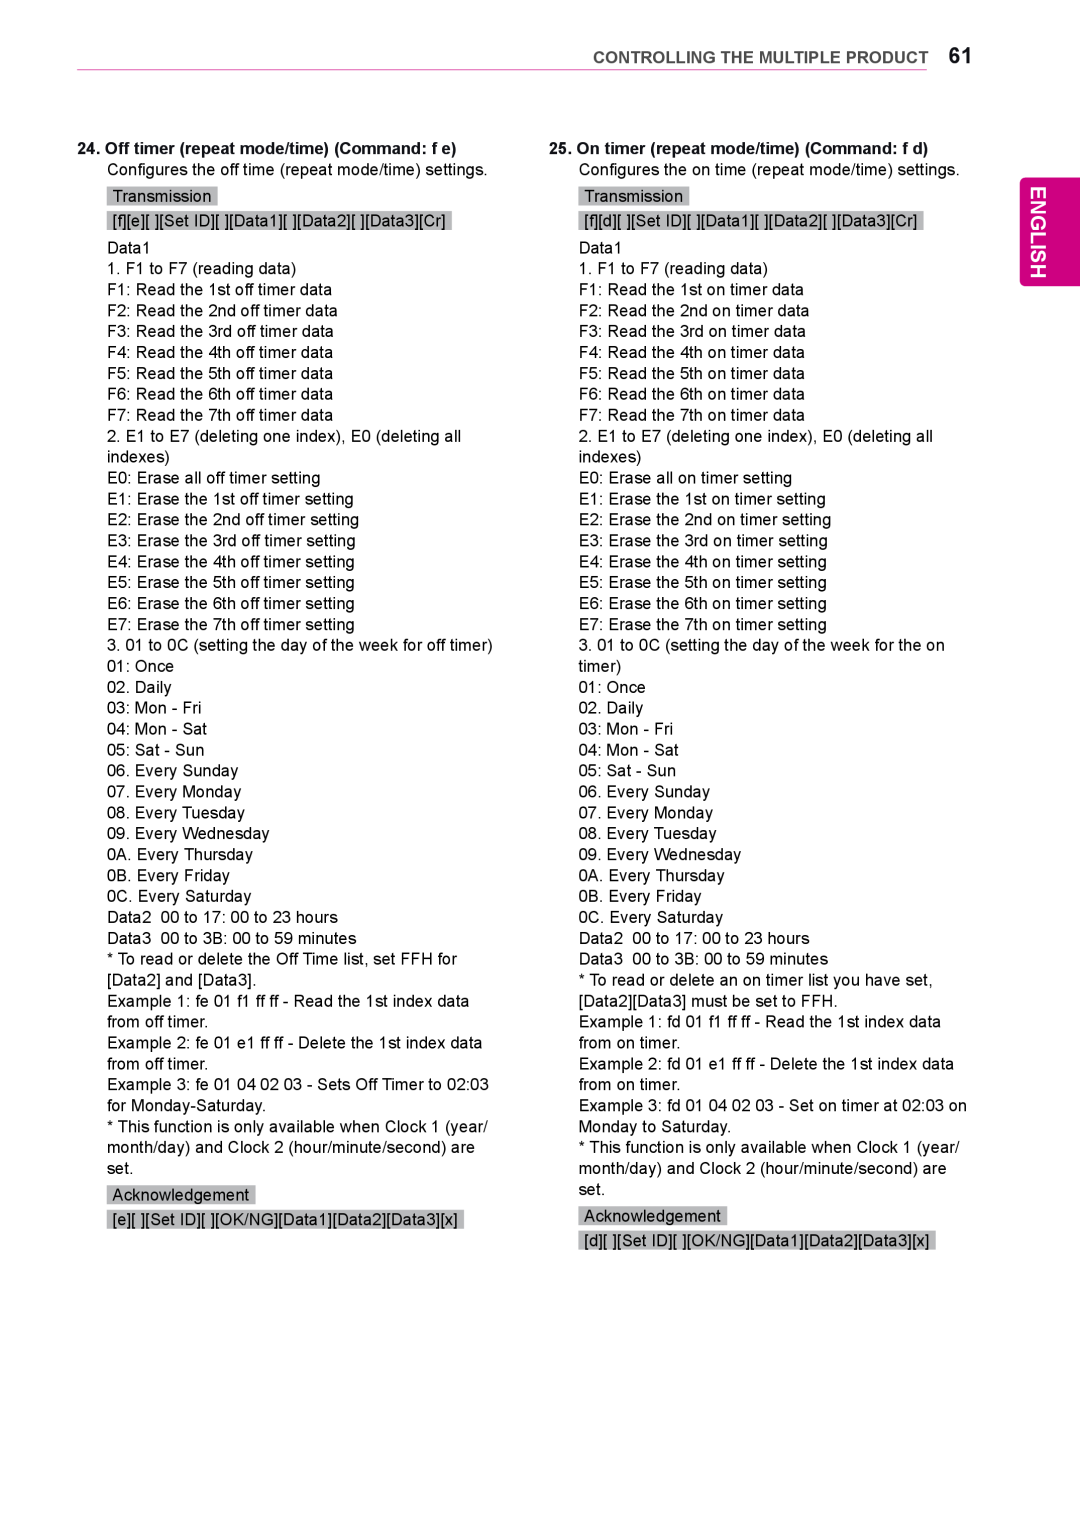 LG Electronics 55LV35A, 47LV35A owner manual English, Controlling The Multiple Product 